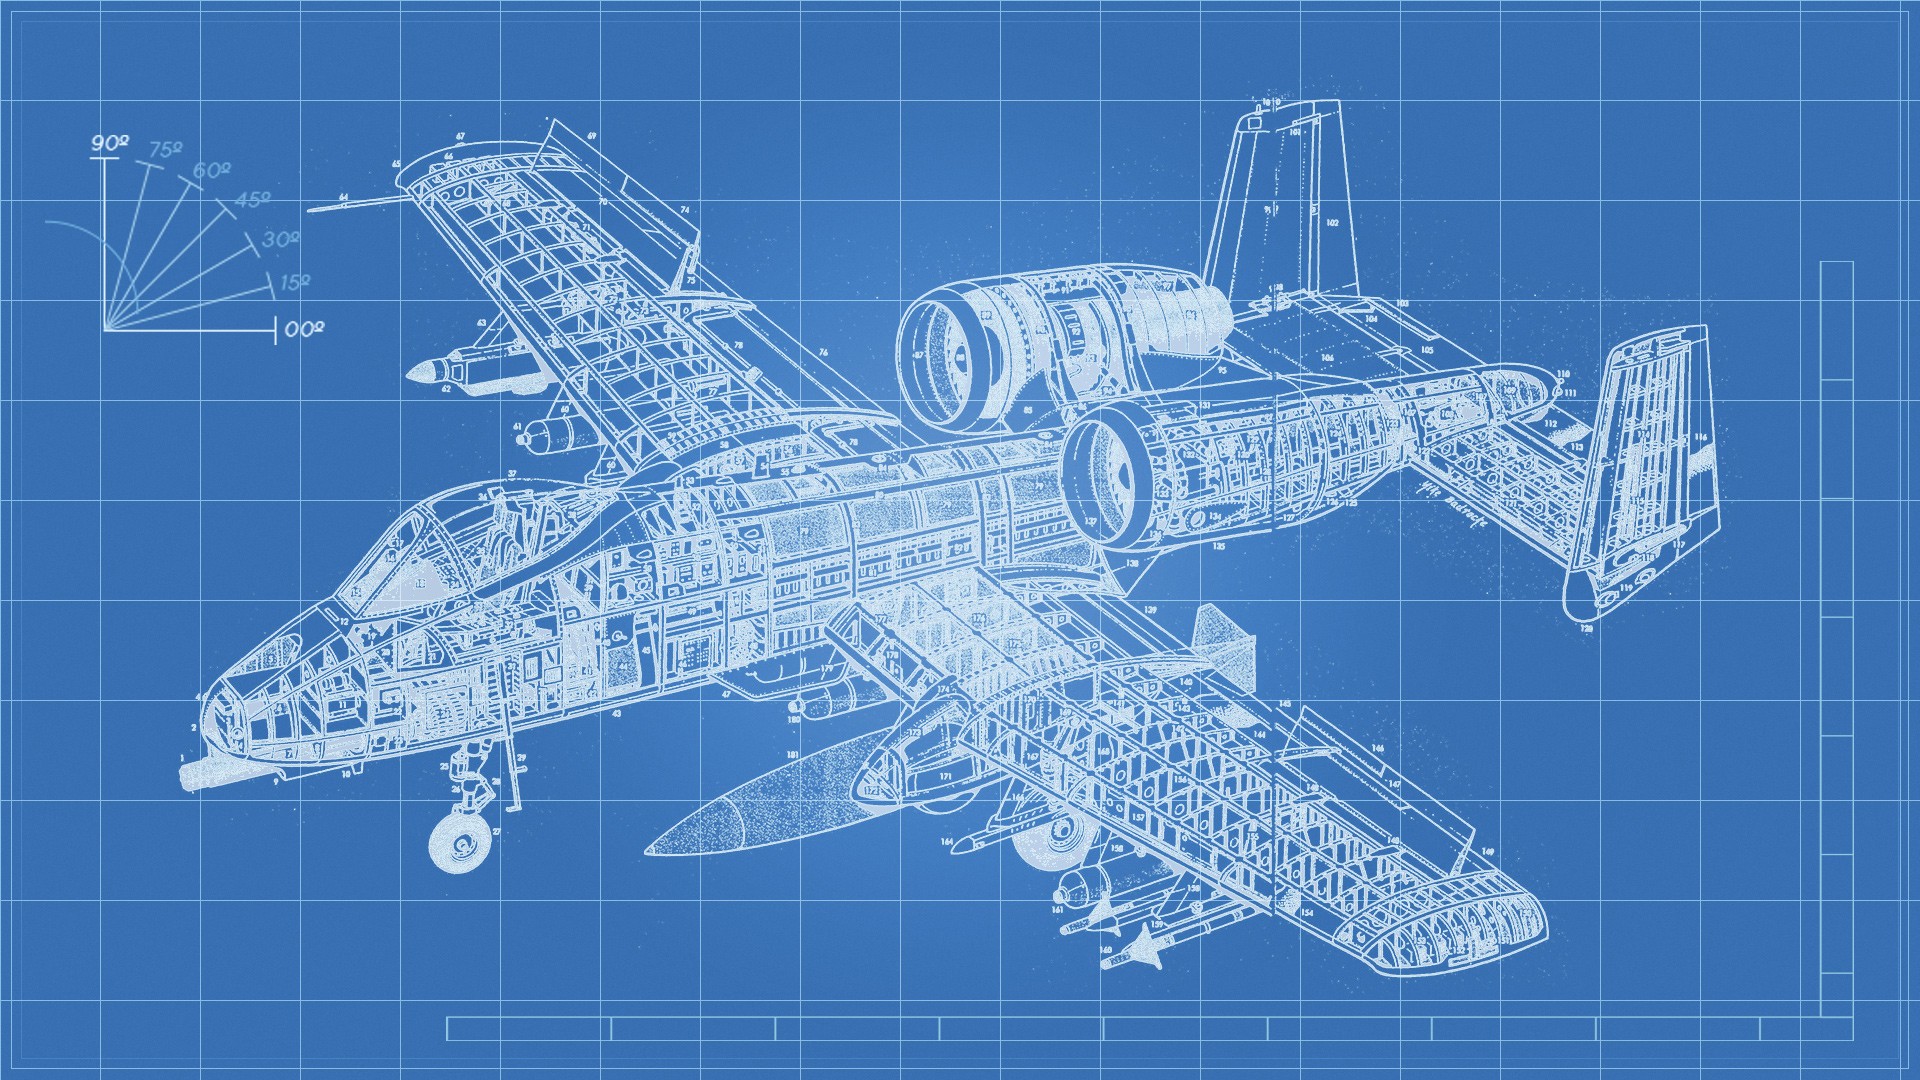 General 1920x1080 airplane technology engineering violet blueprints Warthog military aircraft vehicle A-10 American aircraft Fairchild Republic A-10 Thunderbolt II concept art military vehicle artwork minimalism